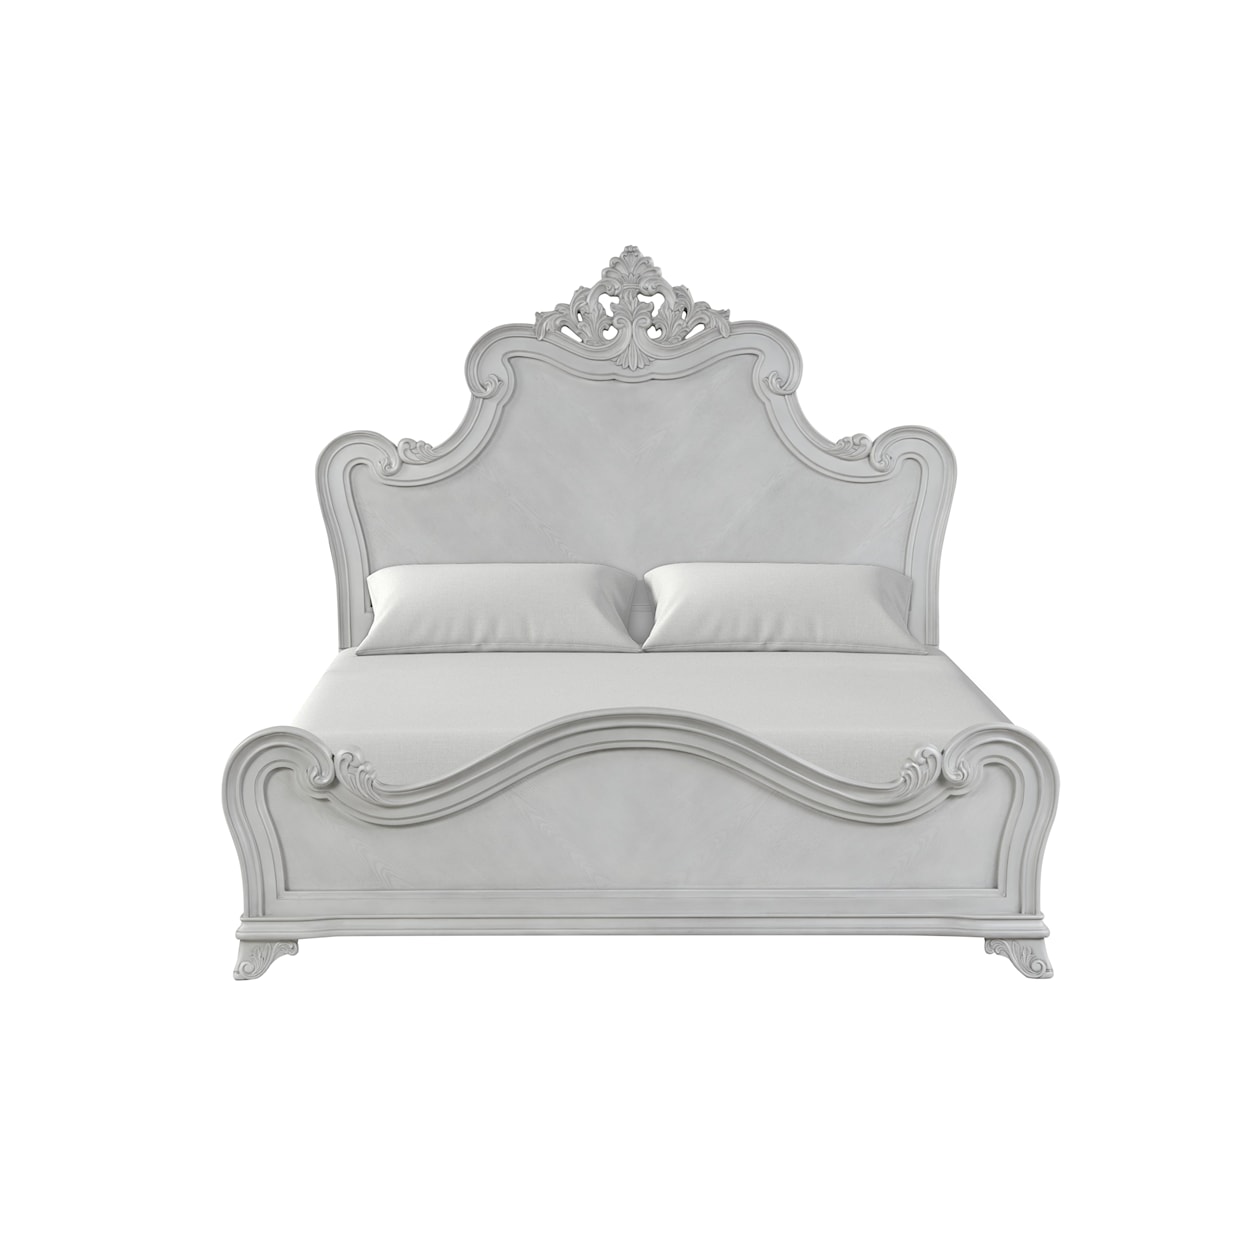 New Classic Cambria Hills Queen Arched Bed